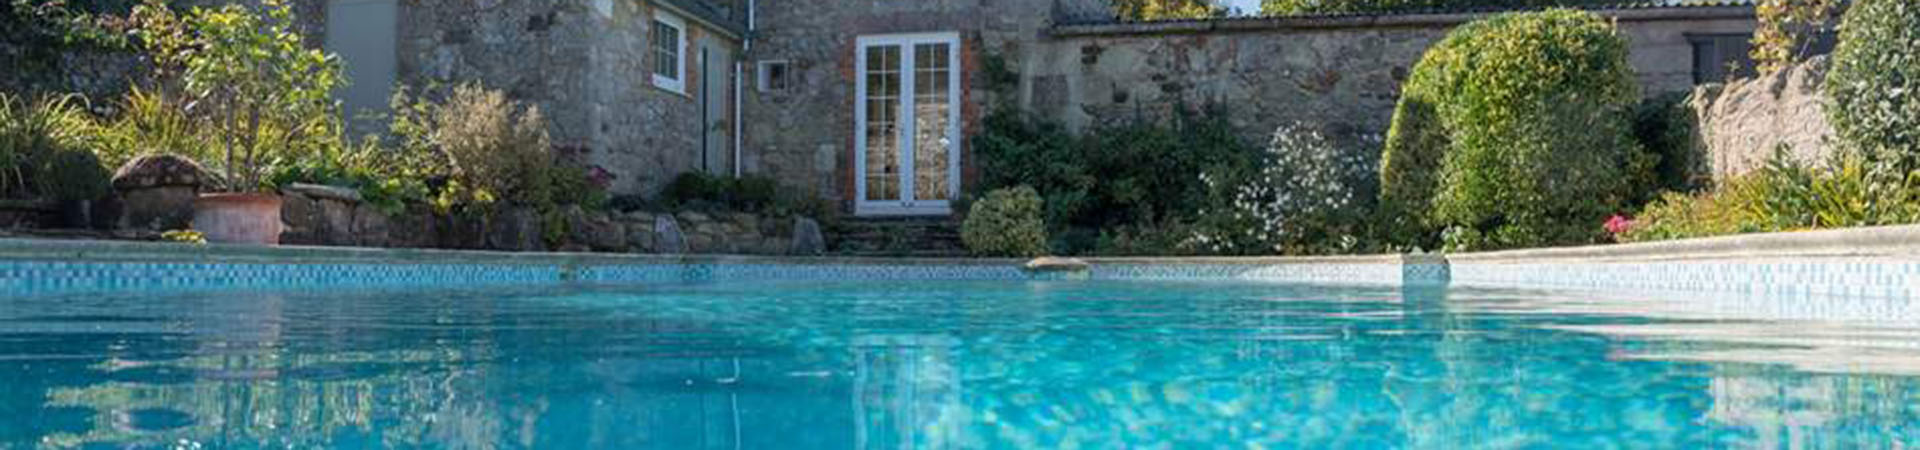 Holiday cottages with pools in South Cornwall